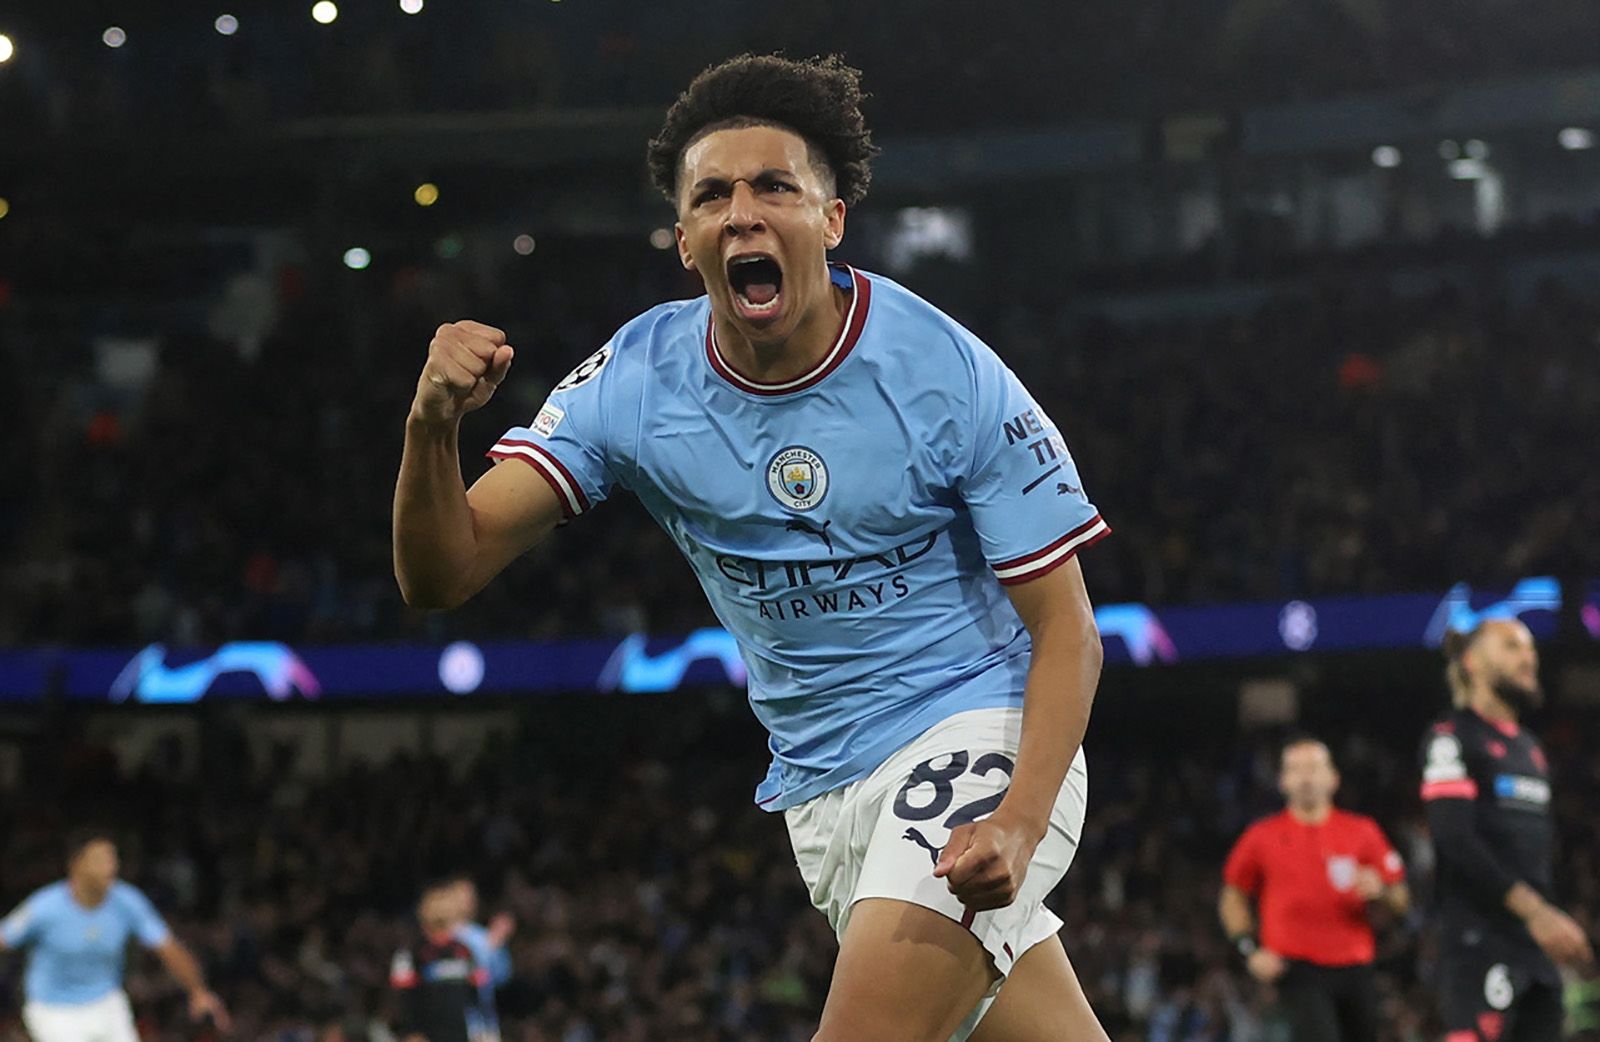 Rico Lewis: The Rise of a Manchester City Star?